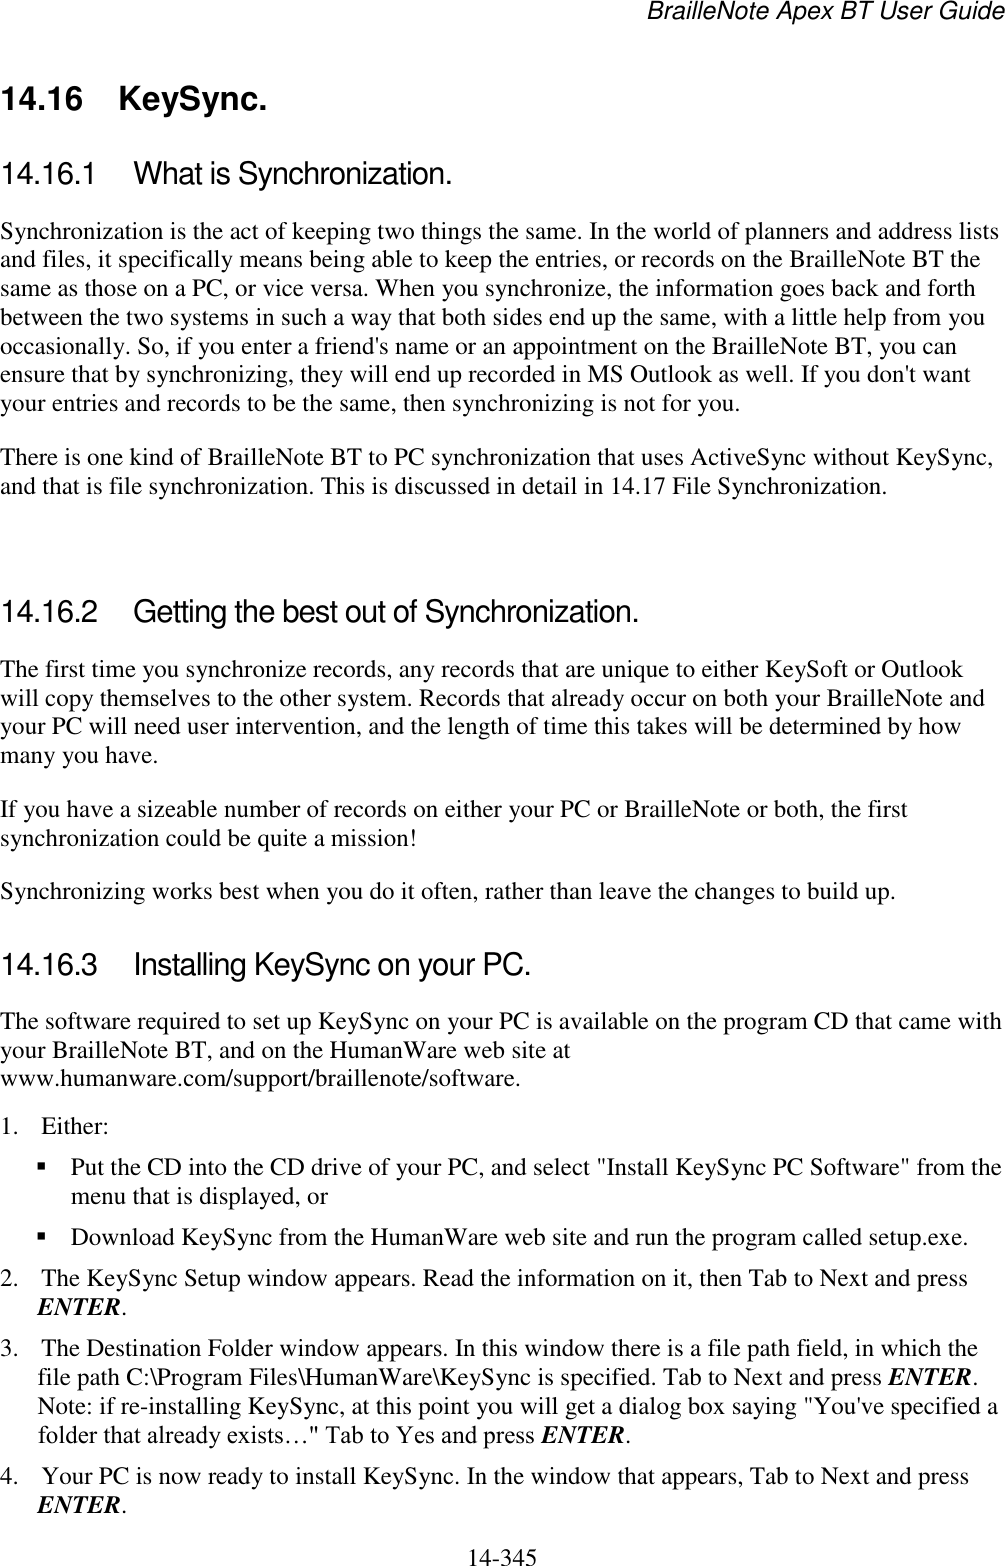 BrailleNote Apex BT User Guide   14-345   14.16  KeySync. 14.16.1  What is Synchronization. Synchronization is the act of keeping two things the same. In the world of planners and address lists and files, it specifically means being able to keep the entries, or records on the BrailleNote BT the same as those on a PC, or vice versa. When you synchronize, the information goes back and forth between the two systems in such a way that both sides end up the same, with a little help from you occasionally. So, if you enter a friend&apos;s name or an appointment on the BrailleNote BT, you can ensure that by synchronizing, they will end up recorded in MS Outlook as well. If you don&apos;t want your entries and records to be the same, then synchronizing is not for you. There is one kind of BrailleNote BT to PC synchronization that uses ActiveSync without KeySync, and that is file synchronization. This is discussed in detail in 14.17 File Synchronization.   14.16.2  Getting the best out of Synchronization. The first time you synchronize records, any records that are unique to either KeySoft or Outlook will copy themselves to the other system. Records that already occur on both your BrailleNote and your PC will need user intervention, and the length of time this takes will be determined by how many you have.  If you have a sizeable number of records on either your PC or BrailleNote or both, the first synchronization could be quite a mission!  Synchronizing works best when you do it often, rather than leave the changes to build up.   14.16.3  Installing KeySync on your PC. The software required to set up KeySync on your PC is available on the program CD that came with your BrailleNote BT, and on the HumanWare web site at www.humanware.com/support/braillenote/software. 1. Either:  Put the CD into the CD drive of your PC, and select &quot;Install KeySync PC Software&quot; from the menu that is displayed, or   Download KeySync from the HumanWare web site and run the program called setup.exe.  2. The KeySync Setup window appears. Read the information on it, then Tab to Next and press ENTER. 3. The Destination Folder window appears. In this window there is a file path field, in which the file path C:\Program Files\HumanWare\KeySync is specified. Tab to Next and press ENTER. Note: if re-installing KeySync, at this point you will get a dialog box saying &quot;You&apos;ve specified a folder that already exists…&quot; Tab to Yes and press ENTER. 4. Your PC is now ready to install KeySync. In the window that appears, Tab to Next and press ENTER. 